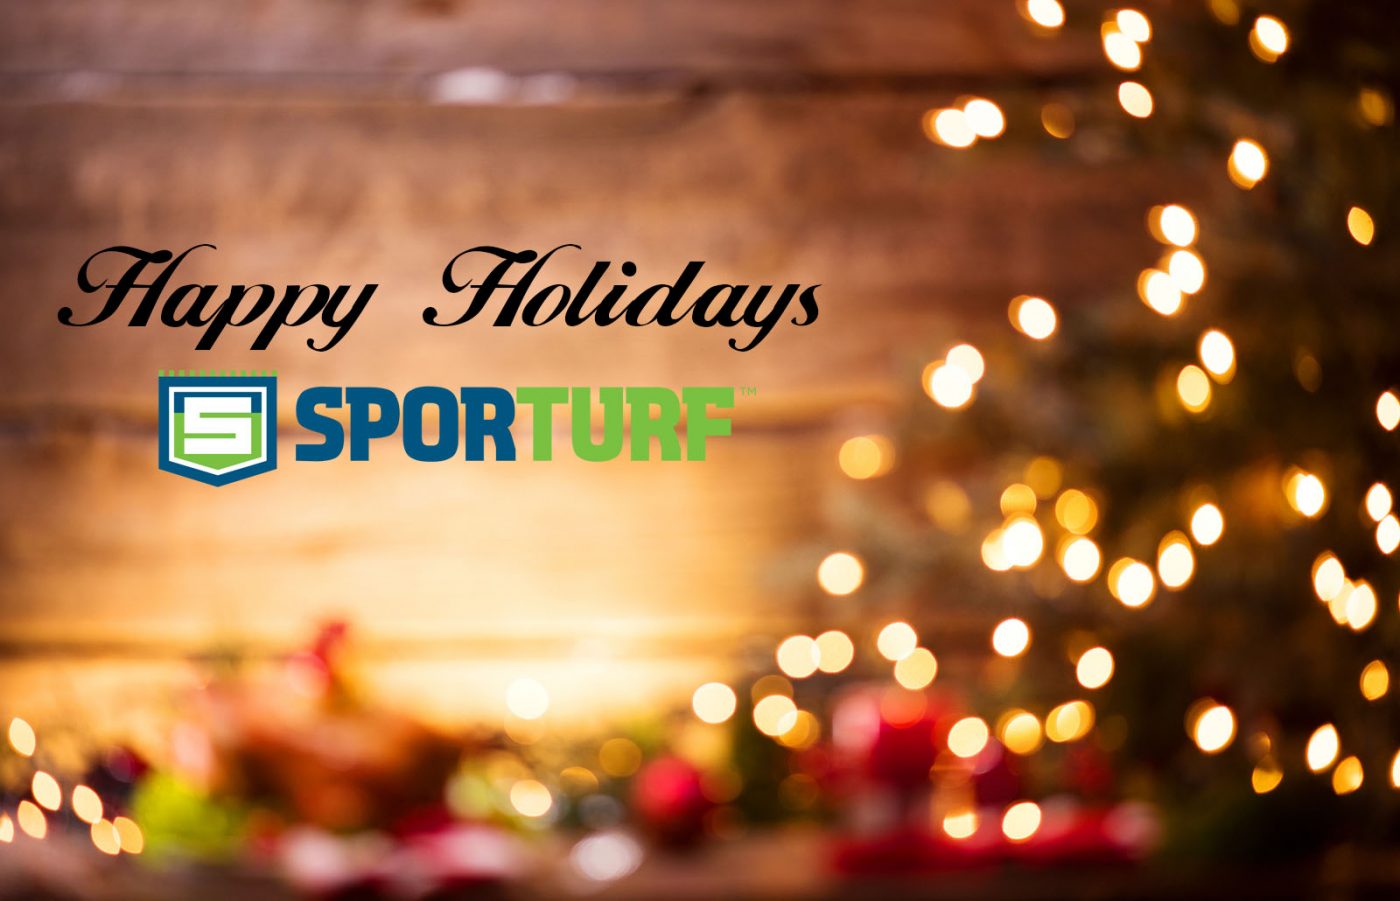 Sporturf Wishes You A Merry Christmas And A Happy New Year Sporturf